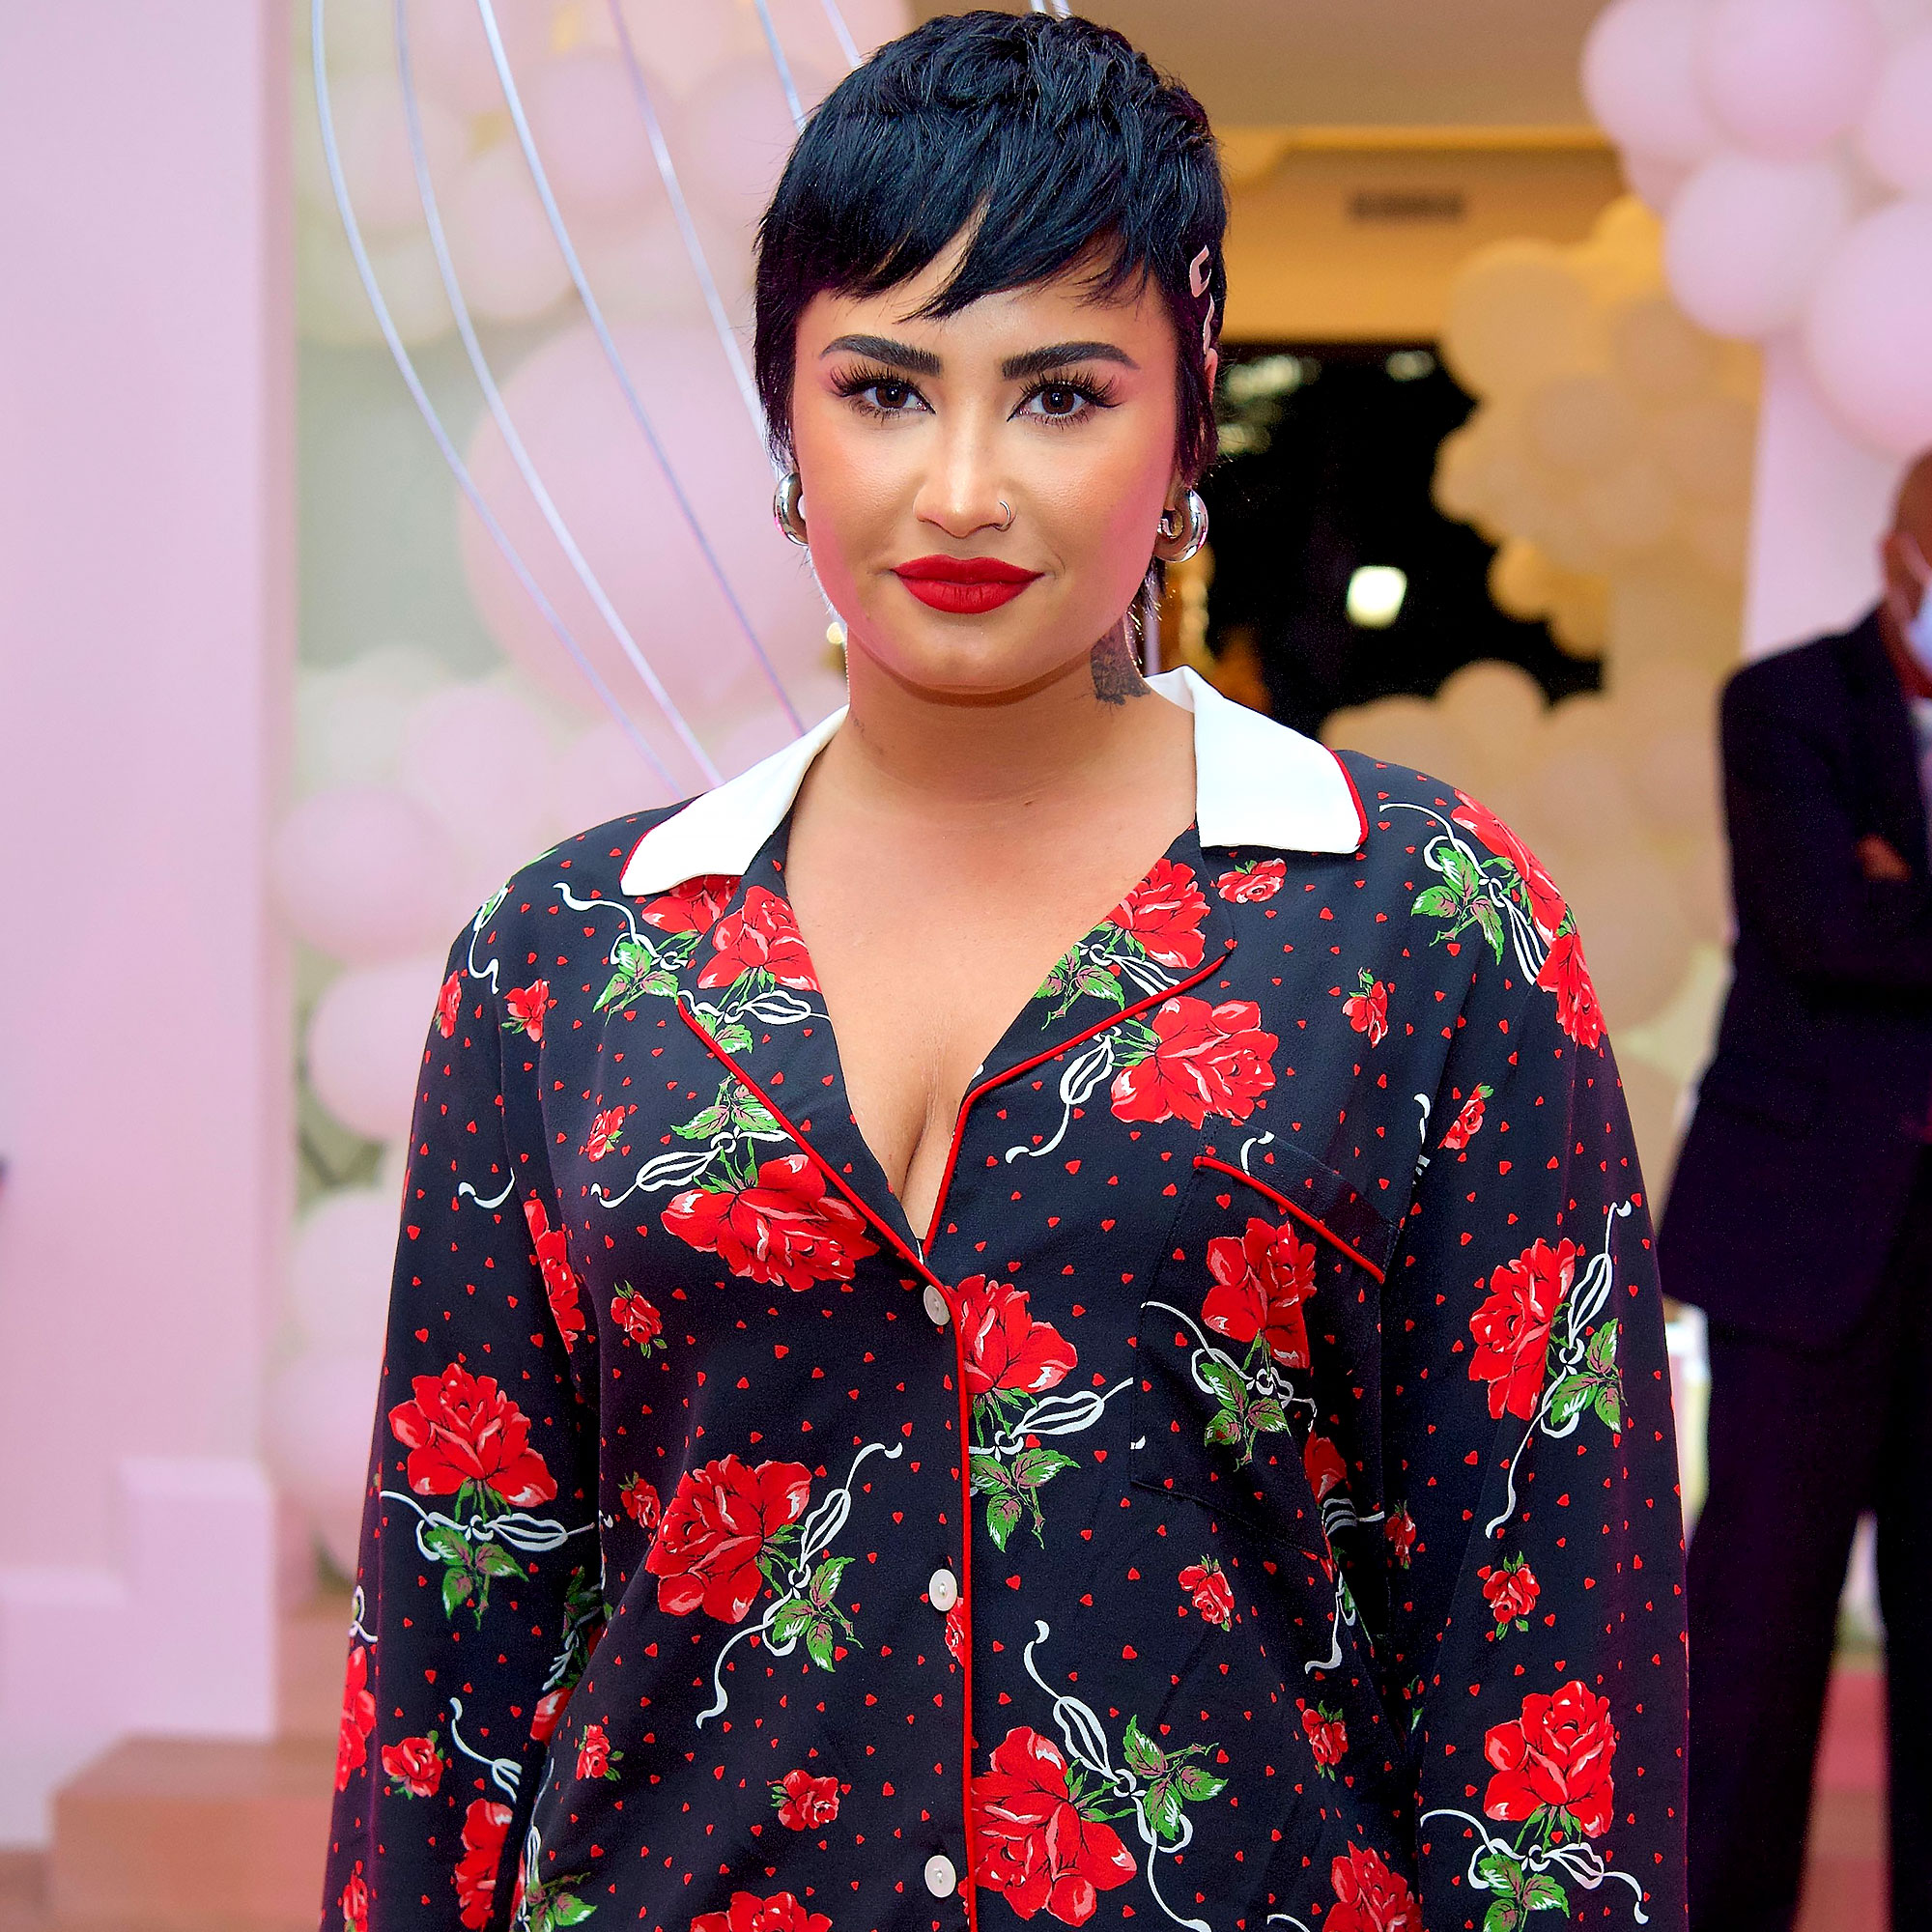 Demi Lovato Is 'Proud' They Made Their New Album 'Clean and Sober